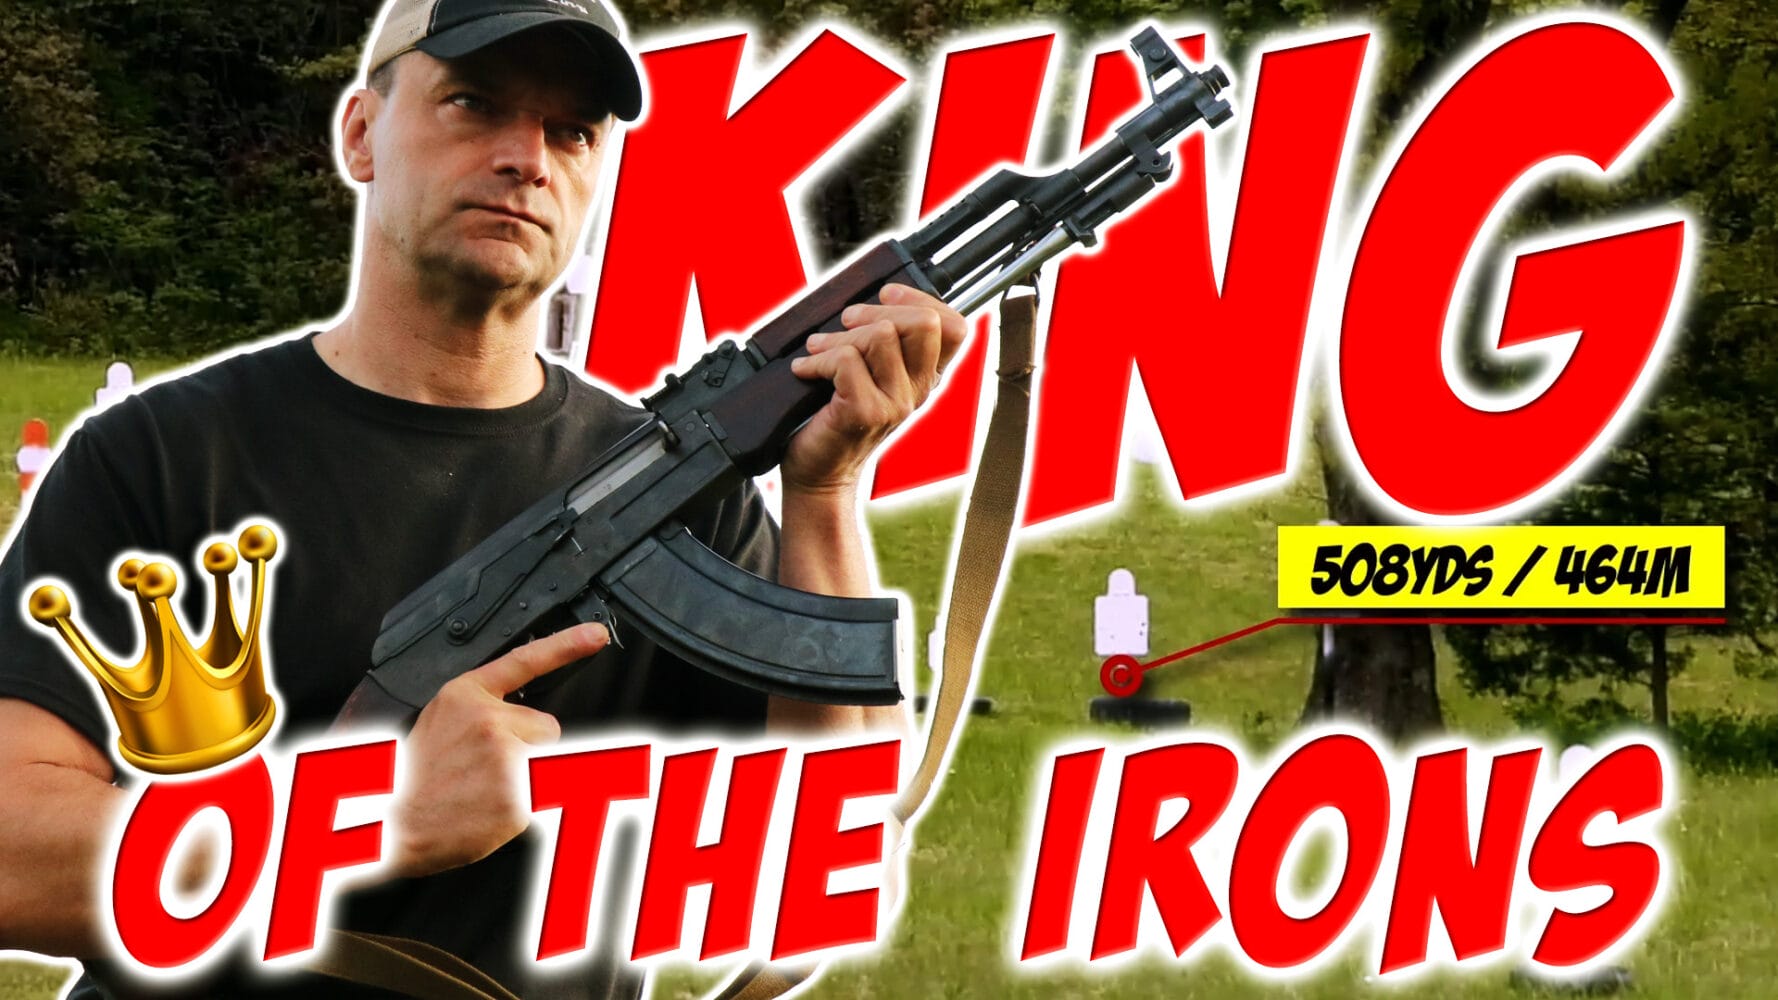 King Of The Irons – Is Internet Wrong about AK47? Chinese Intervention!